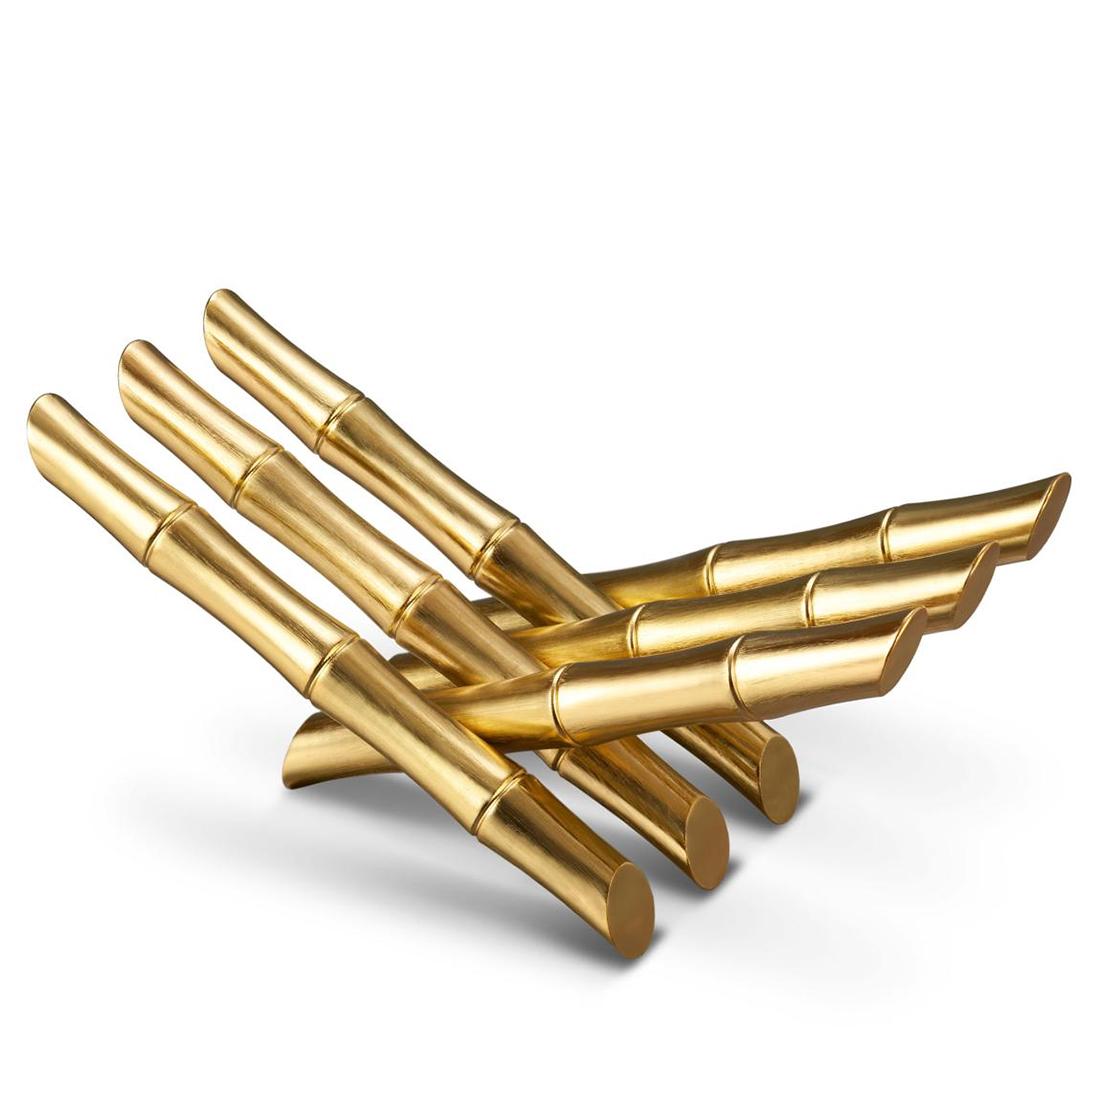 Bookrest bamboos in polished
stainless steel, 24-karat gold-plated
handcrafted.
  